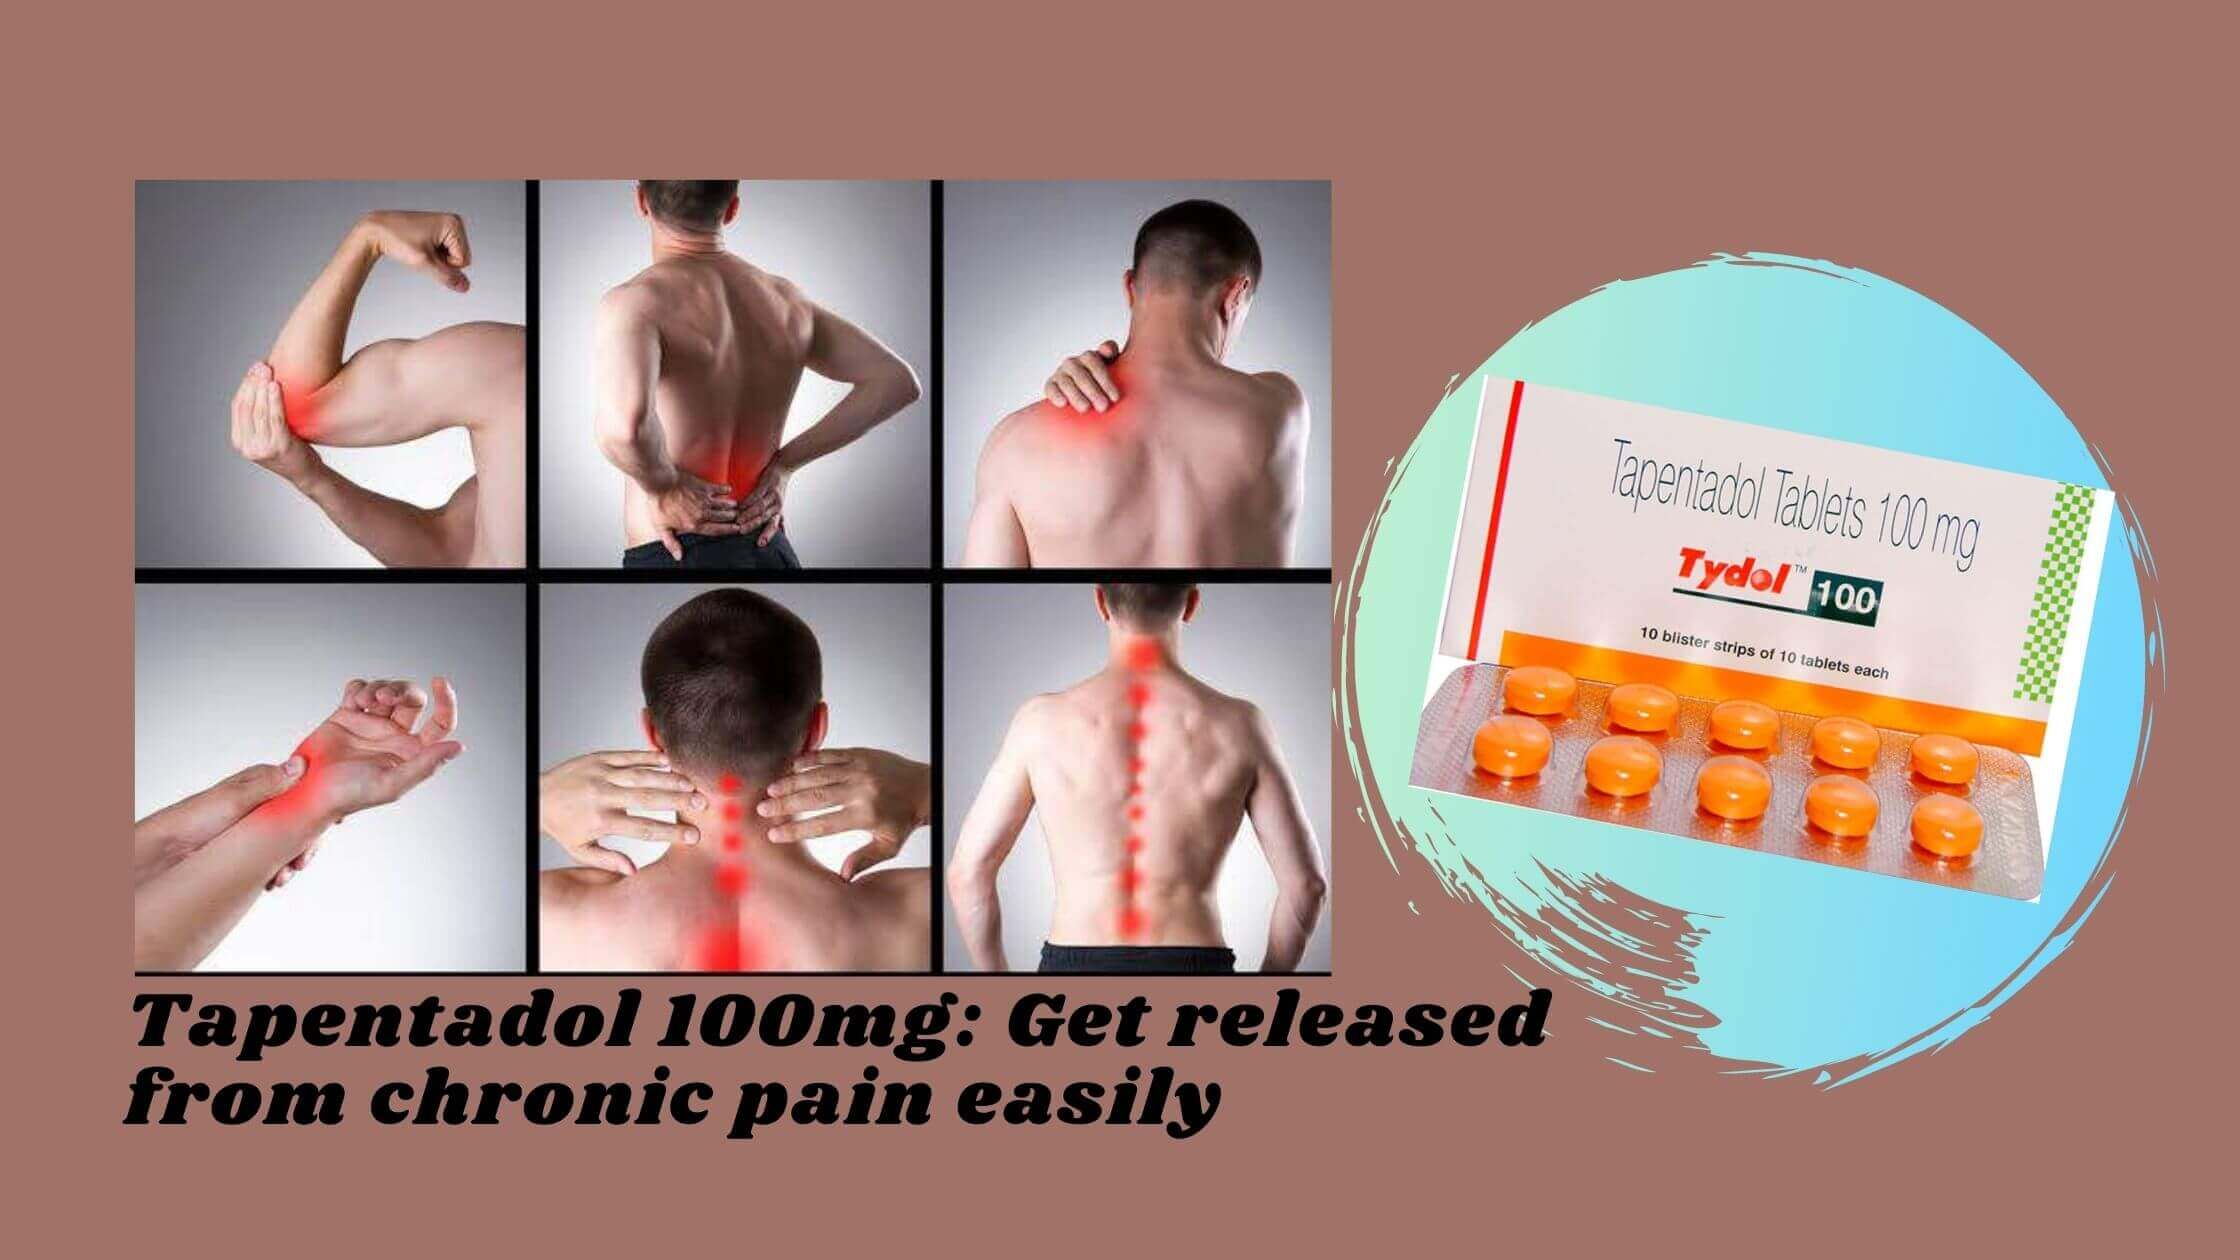 Tapentadol 100mg: Get relief from chronic pain easily